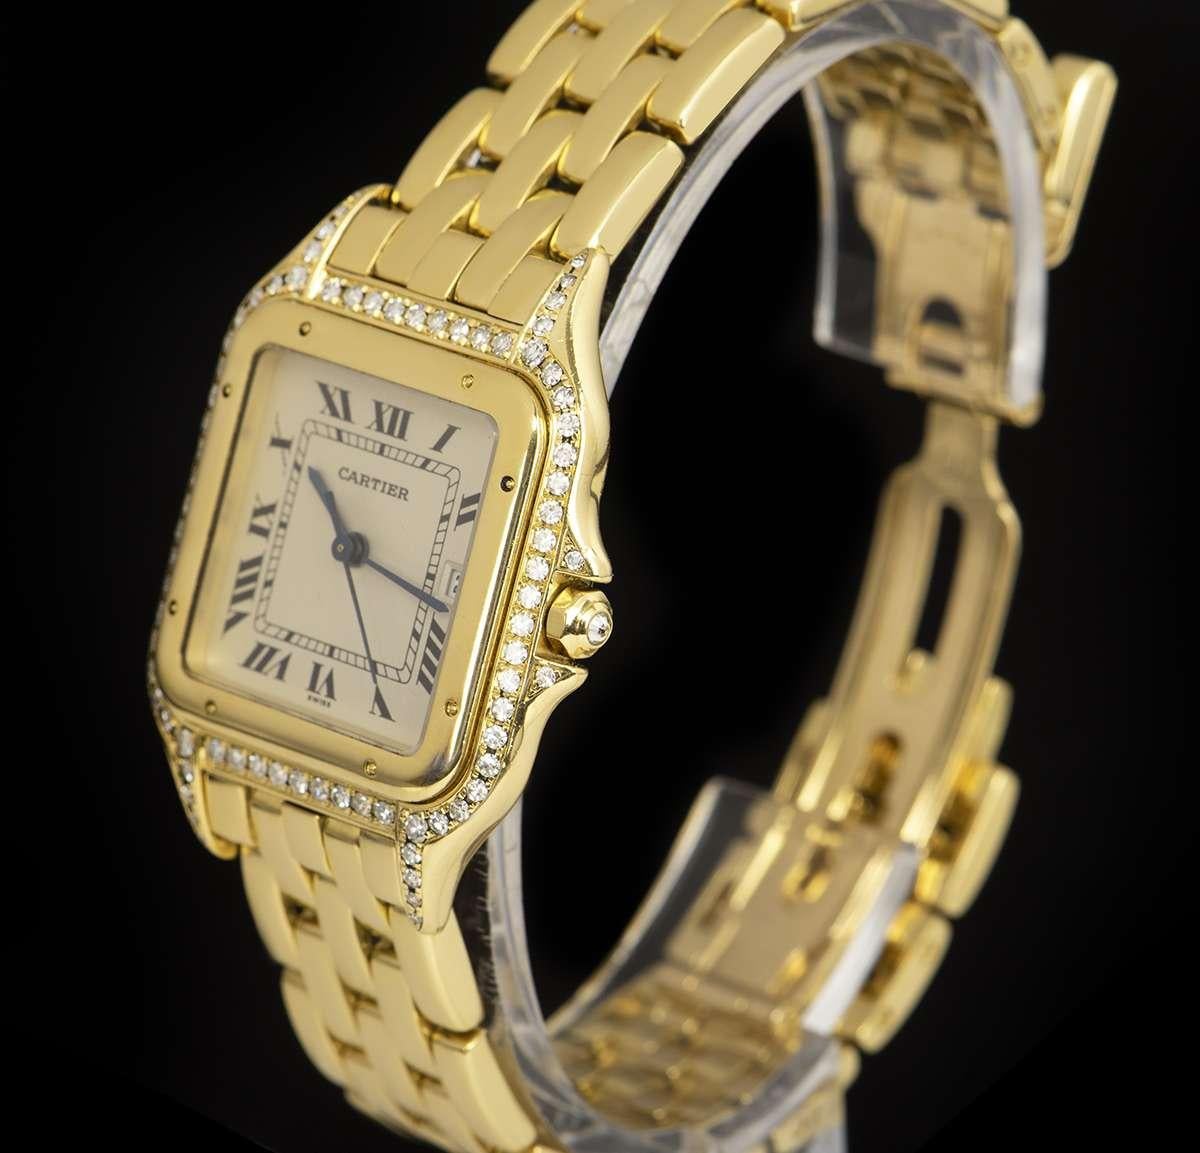 An 18k Yellow Gold Panthere Wristwatch, silver dial with roman numerals and a secret signature at 